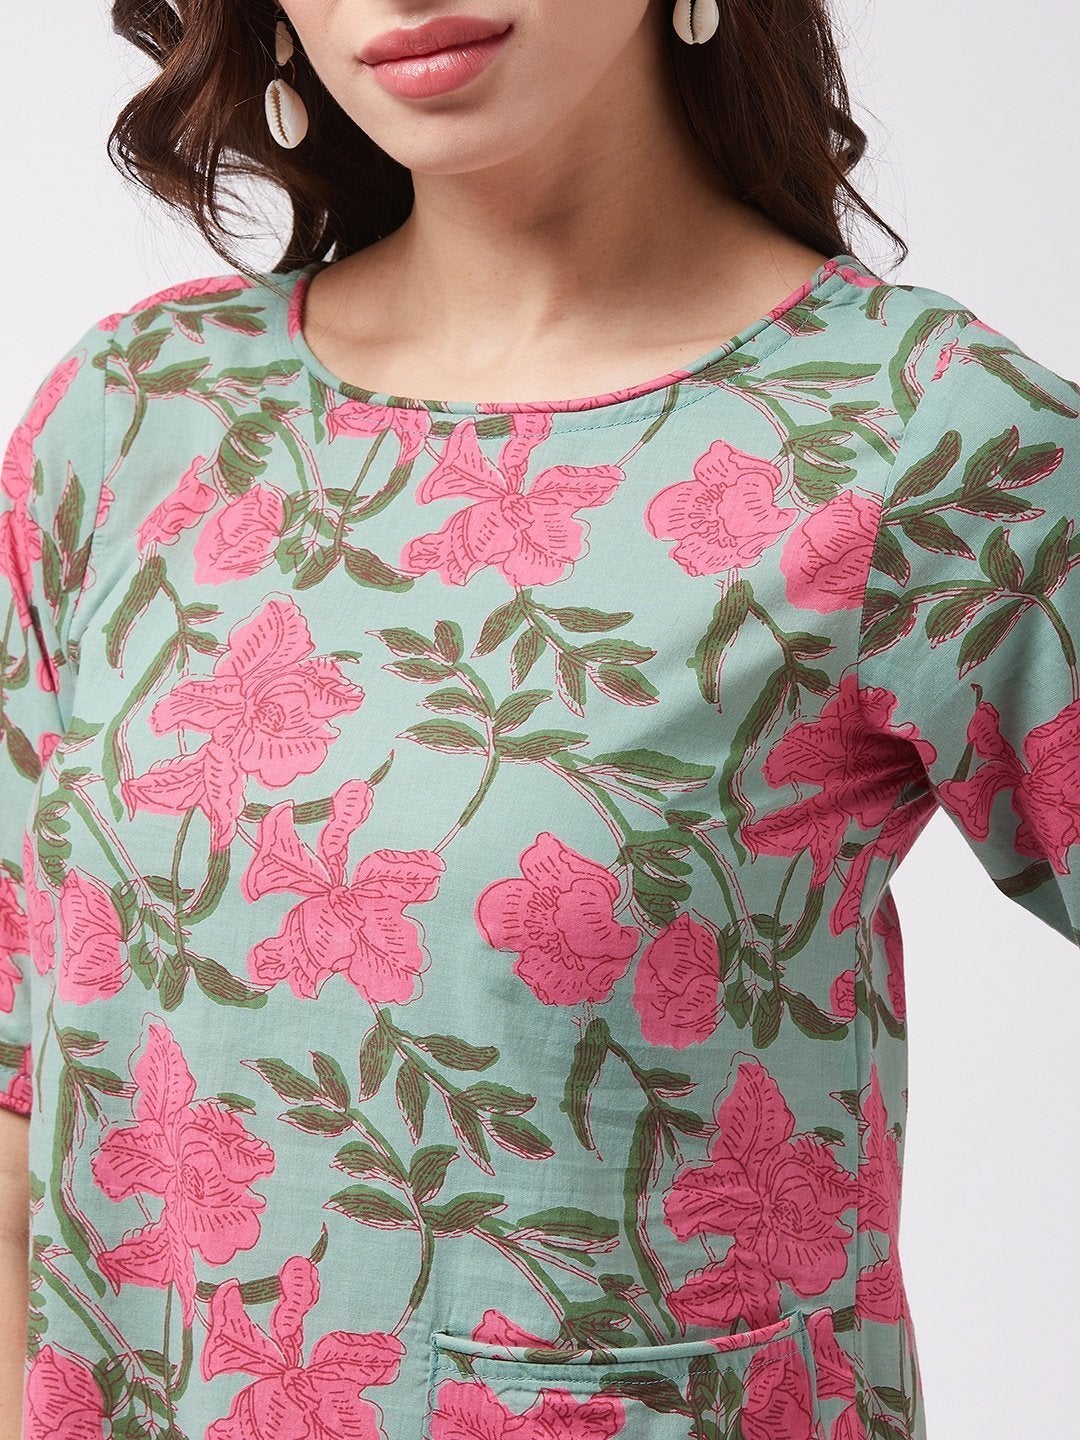 Women's Green Pink Floral Top - InWeave